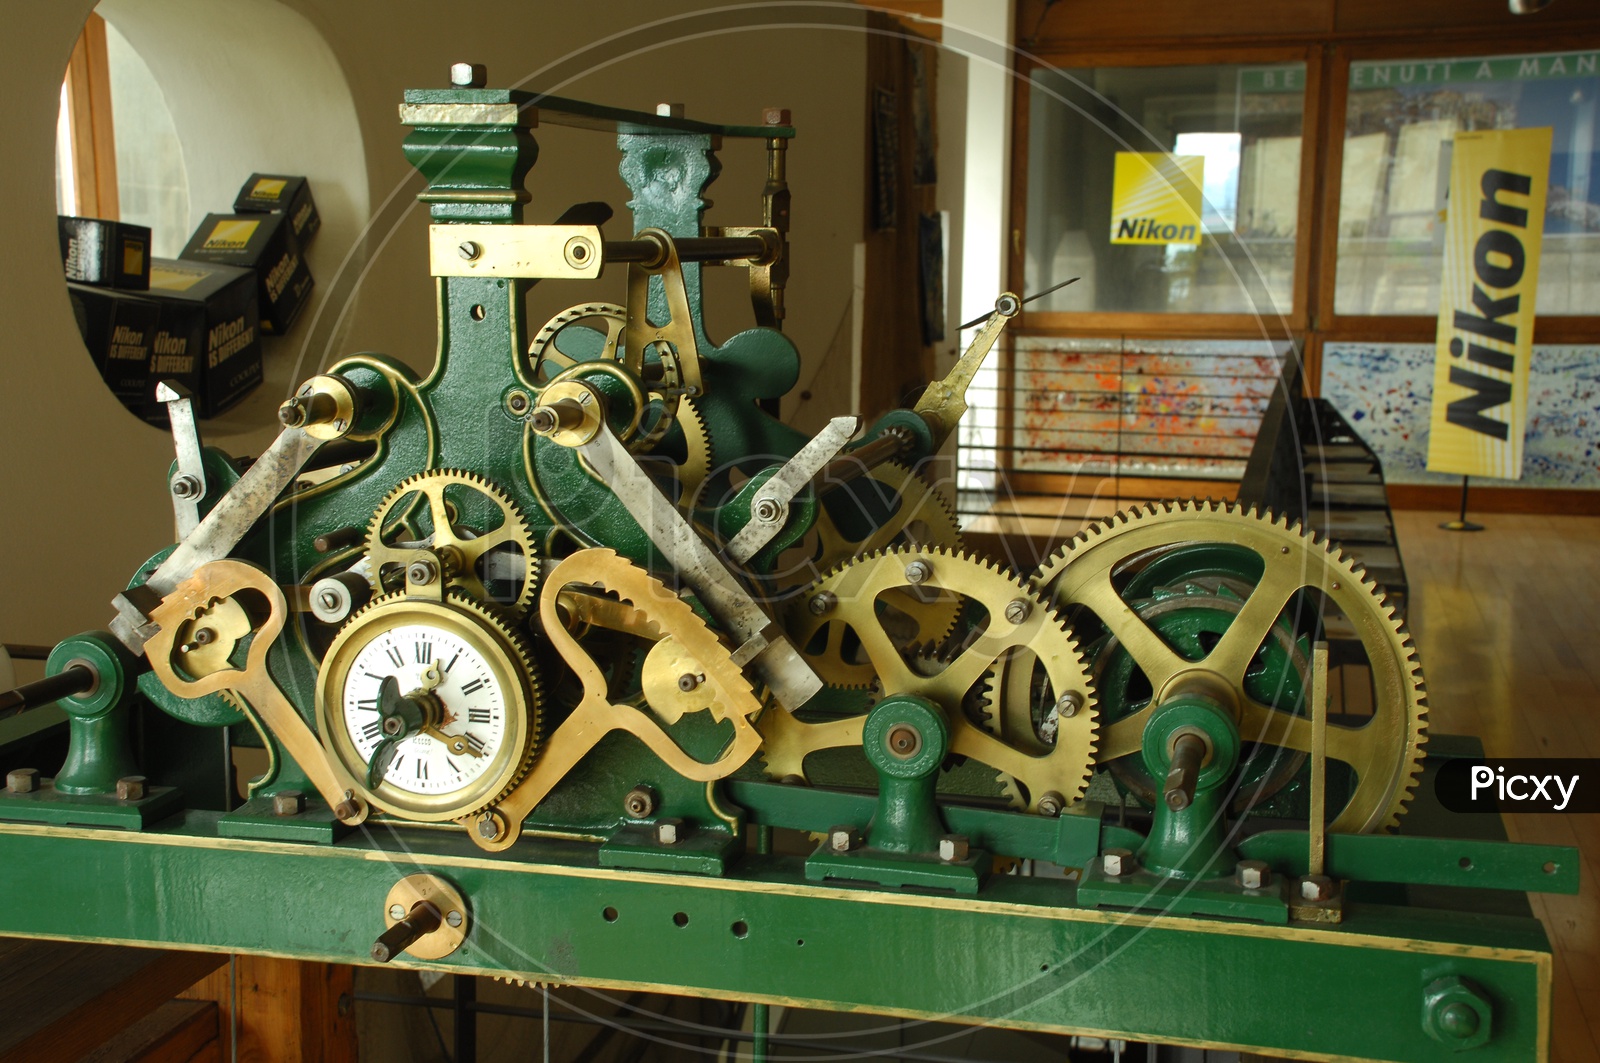 An Old machine With Gear wheels and Measure Indicator